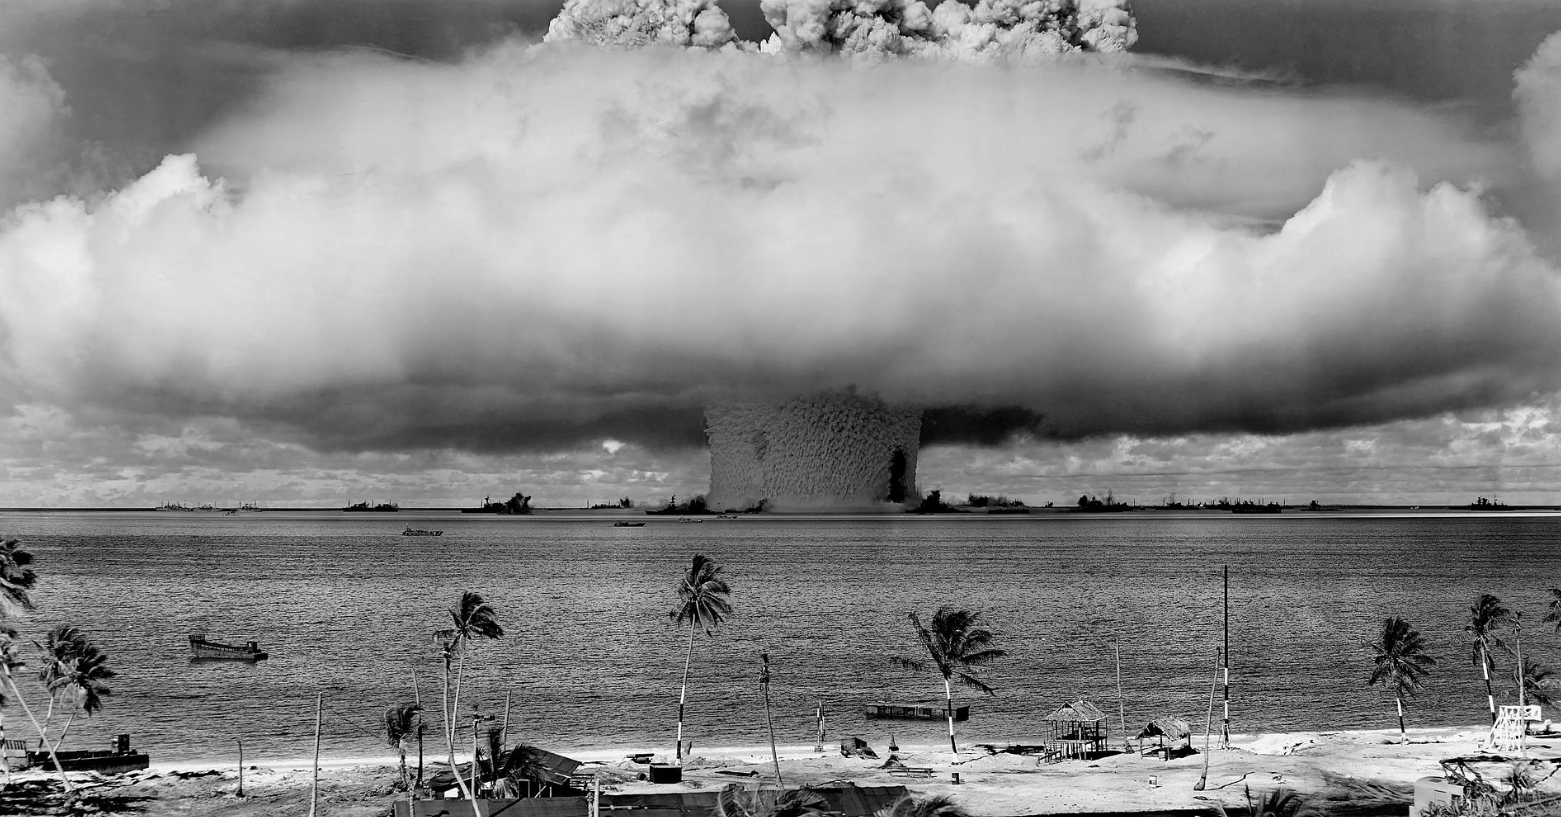 nuclear-bomb-test-may-7-2020-2